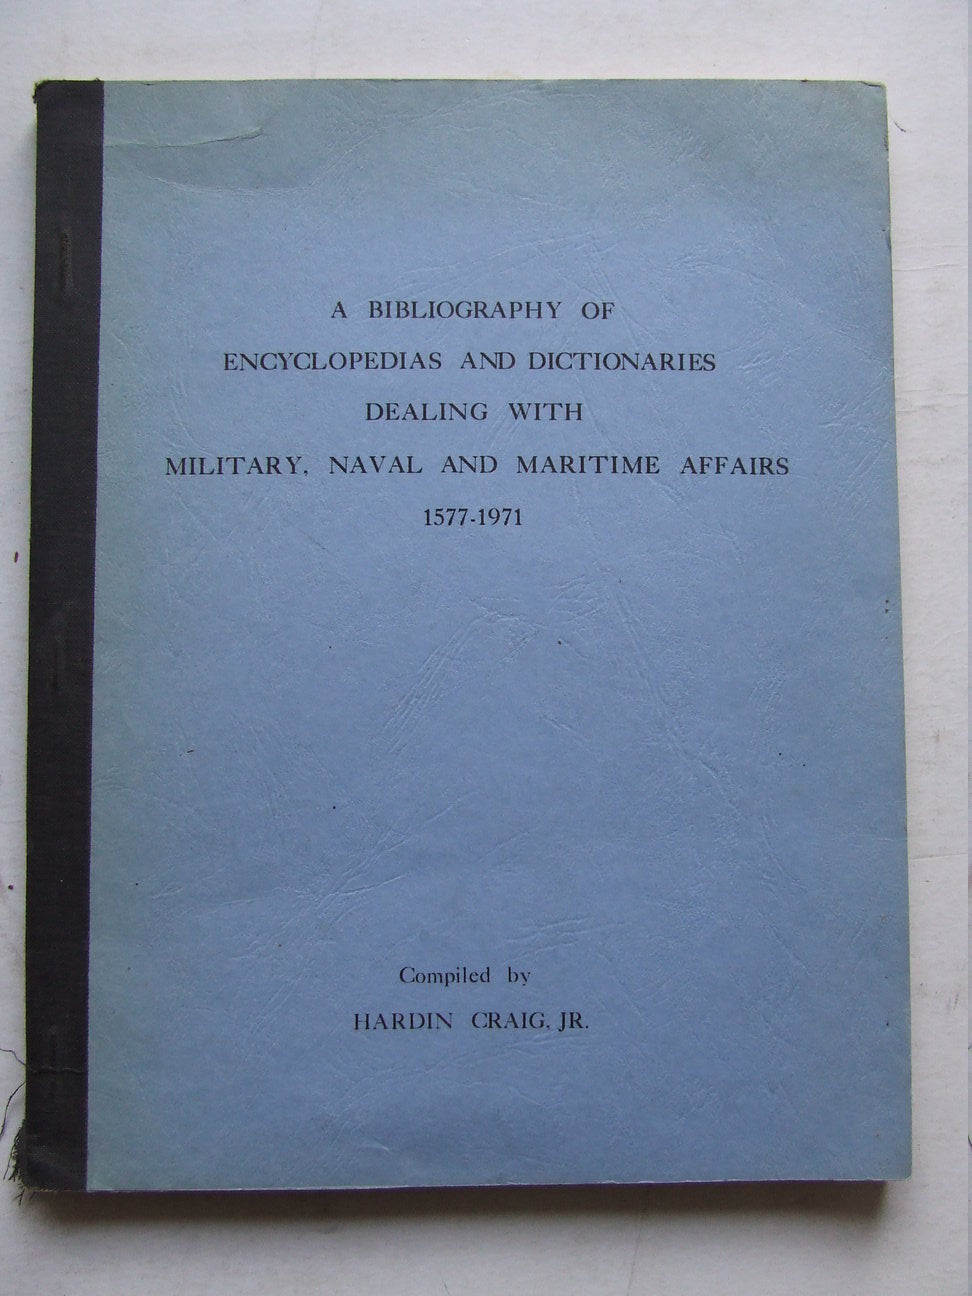 Bibliography of Encyclopedias and Dictionaries dealing with Military, Naval and Maritime  Matters 1577-1971